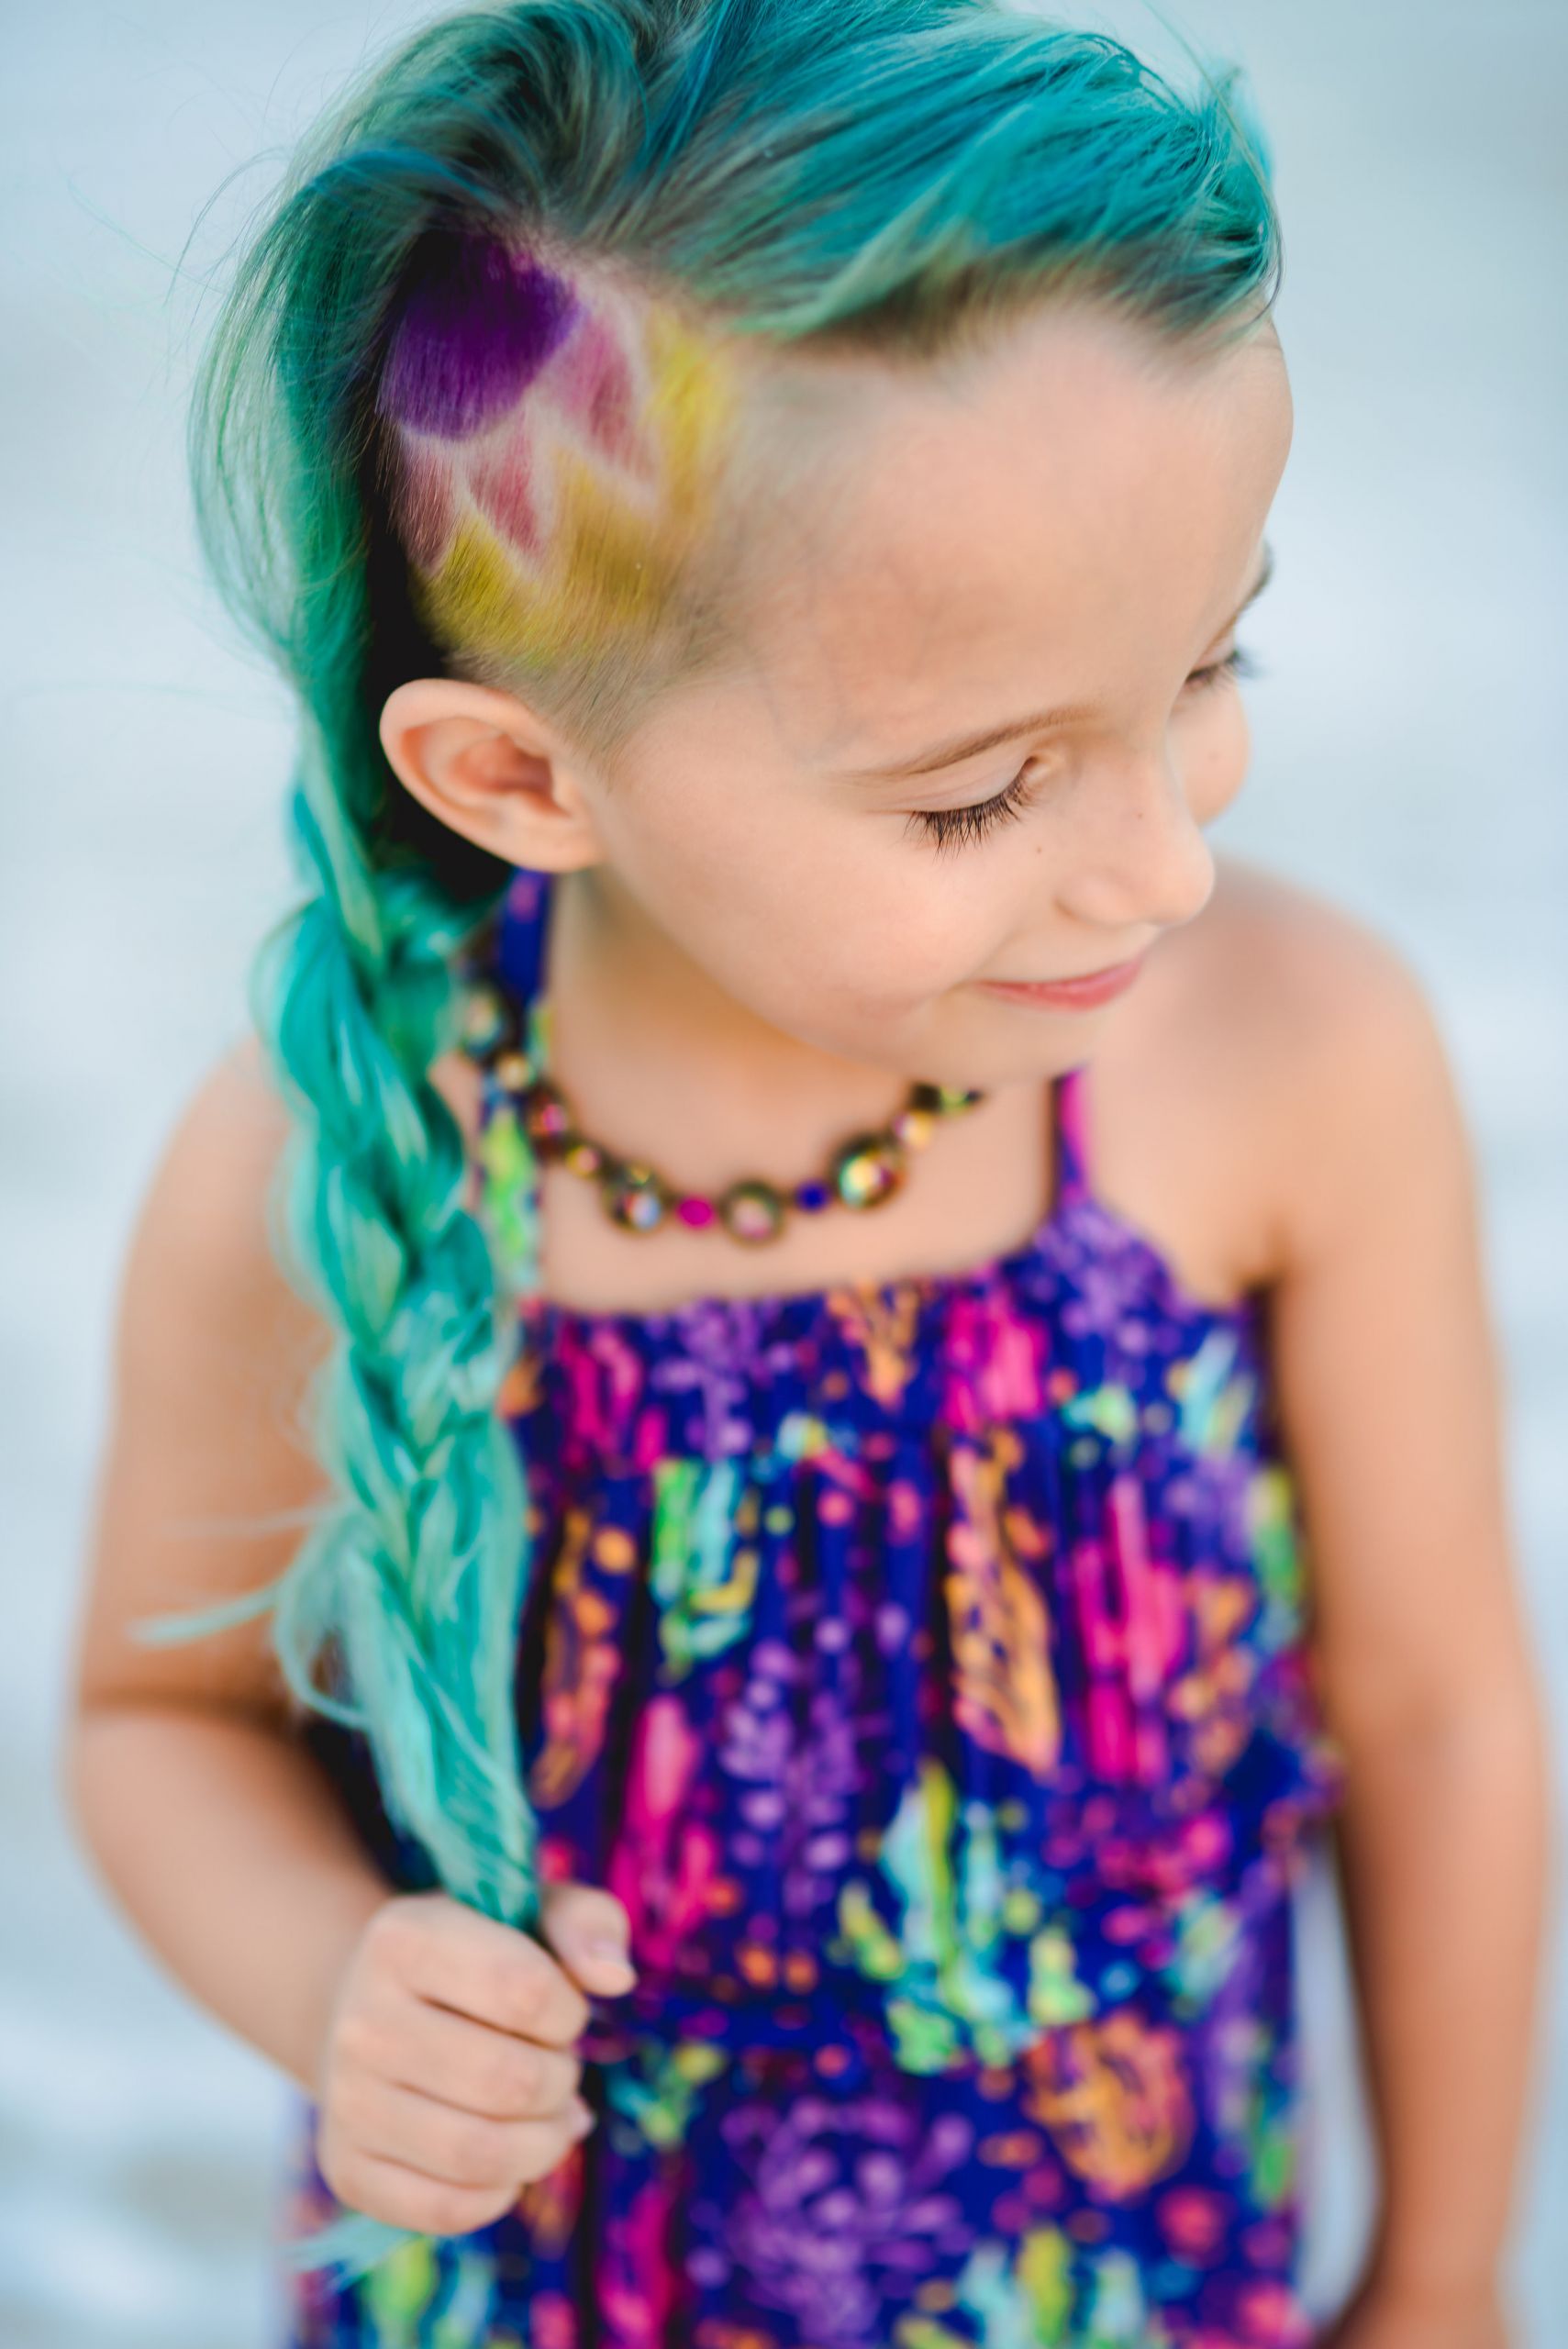 Hair Color For Children
 Should You Give Your Kids a Funky Hair Makeover